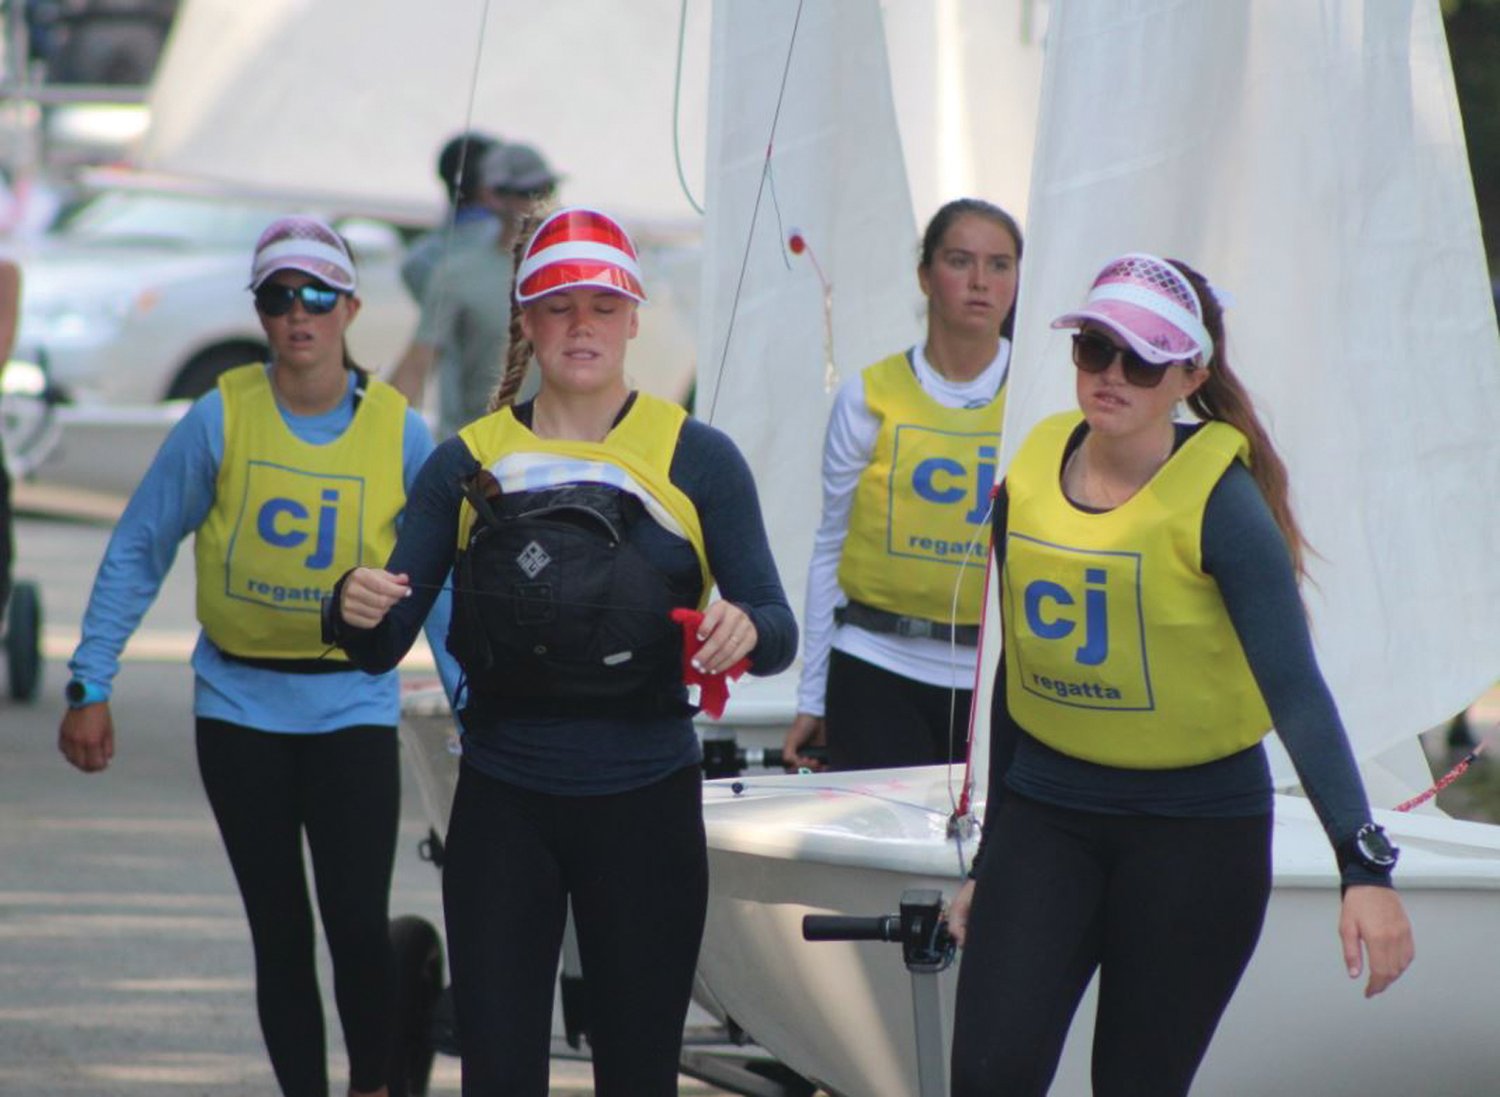 SETTING SAIL: Sailors hit the water to compete in this year’s CJ Buckley Regatta at East Greenwich Bay. This was the 18th annual event which returned to action after missing last year due to the pandemic.